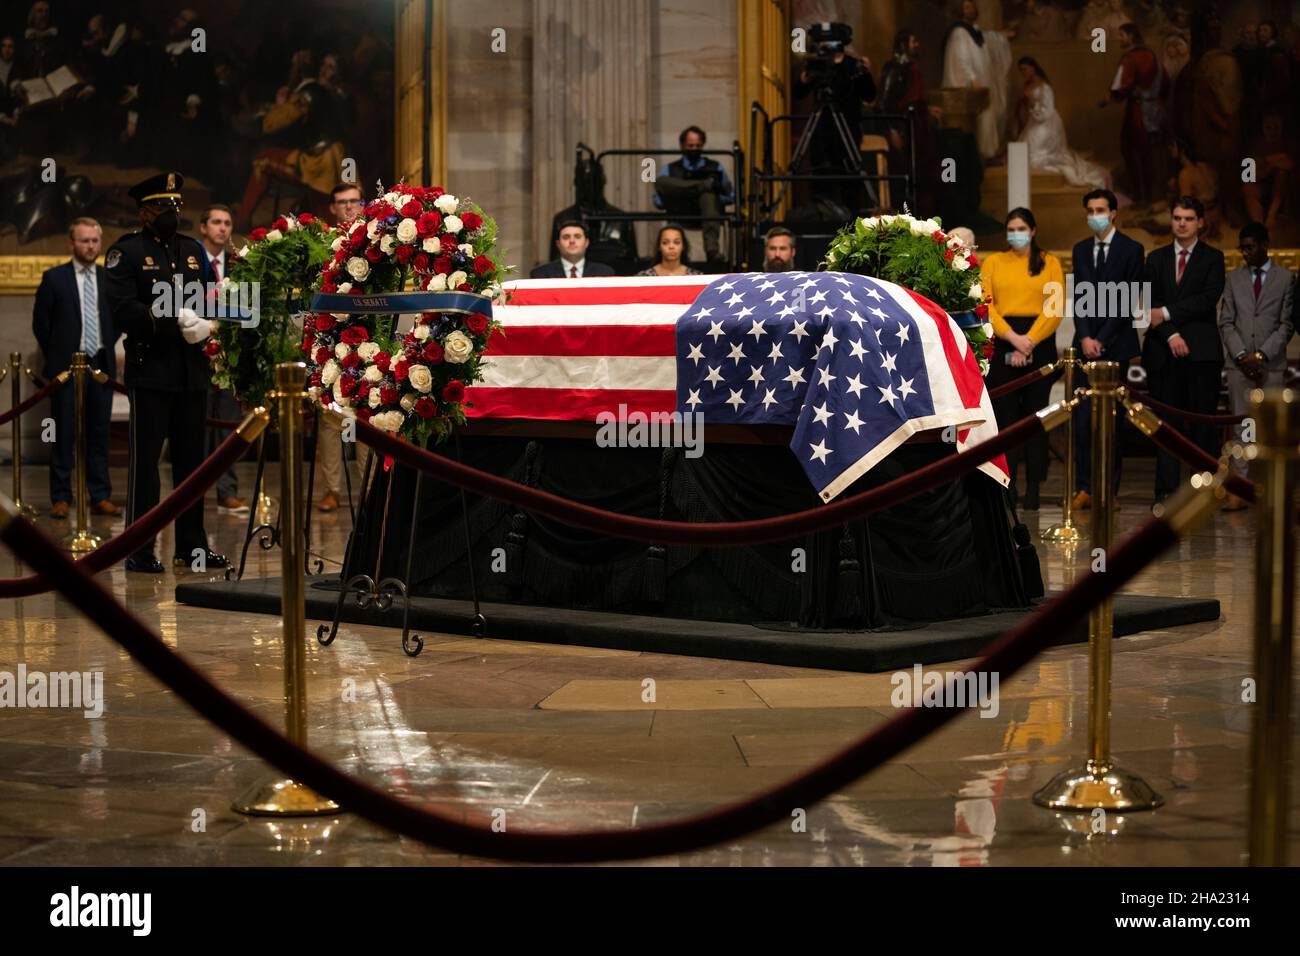 Washington, USA. 09th Dec, 2021. People gather to pay their respects to former Senator Robert J. Dole (R-KS) as he lies in state at the Rotunda of the U.S. Capitol in Washington, DC on Thursday, December 9, 2021. (Photo by Sarahbeth Maney/Pool/Sipa USA) Credit: Sipa USA/Alamy Live News Stock Photo